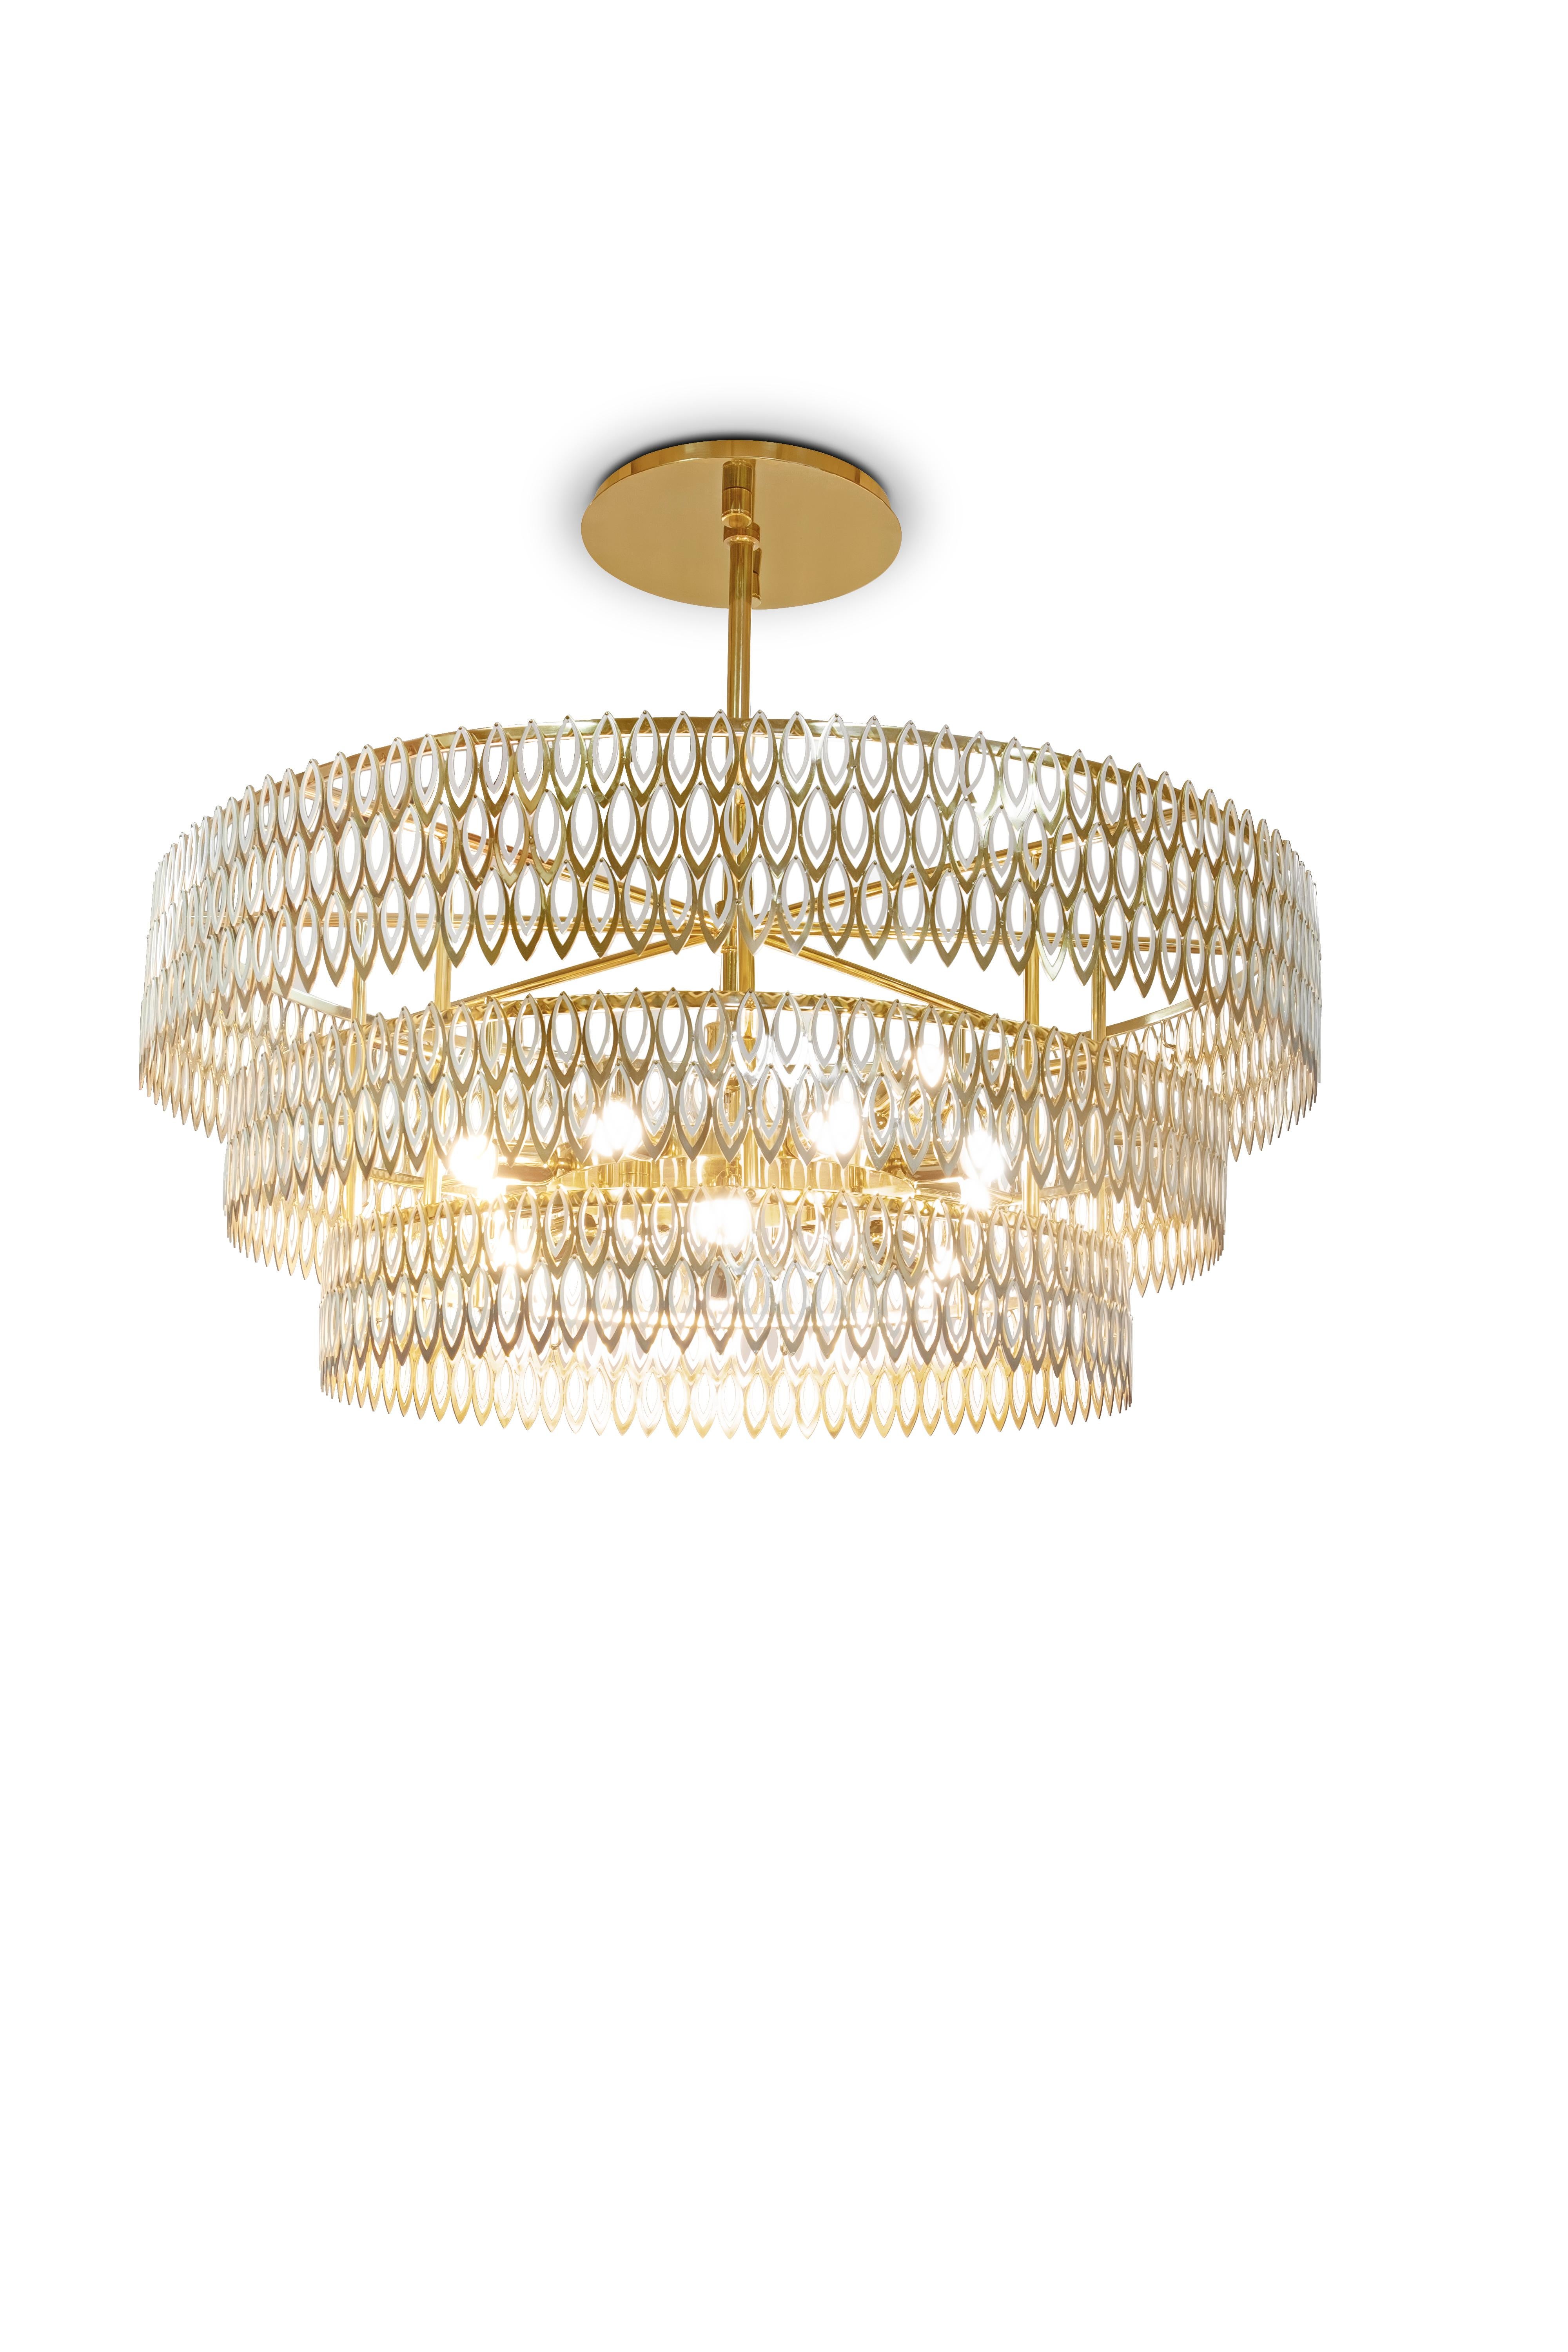 Petal is a modern chandelier which brings to any interior design set a luxurious presence. Its 3 imposing tiers of petal-shaped brass rings, finished with a rhythmic combination of of lacquered stainless steel with brass varnish finish, reflects the